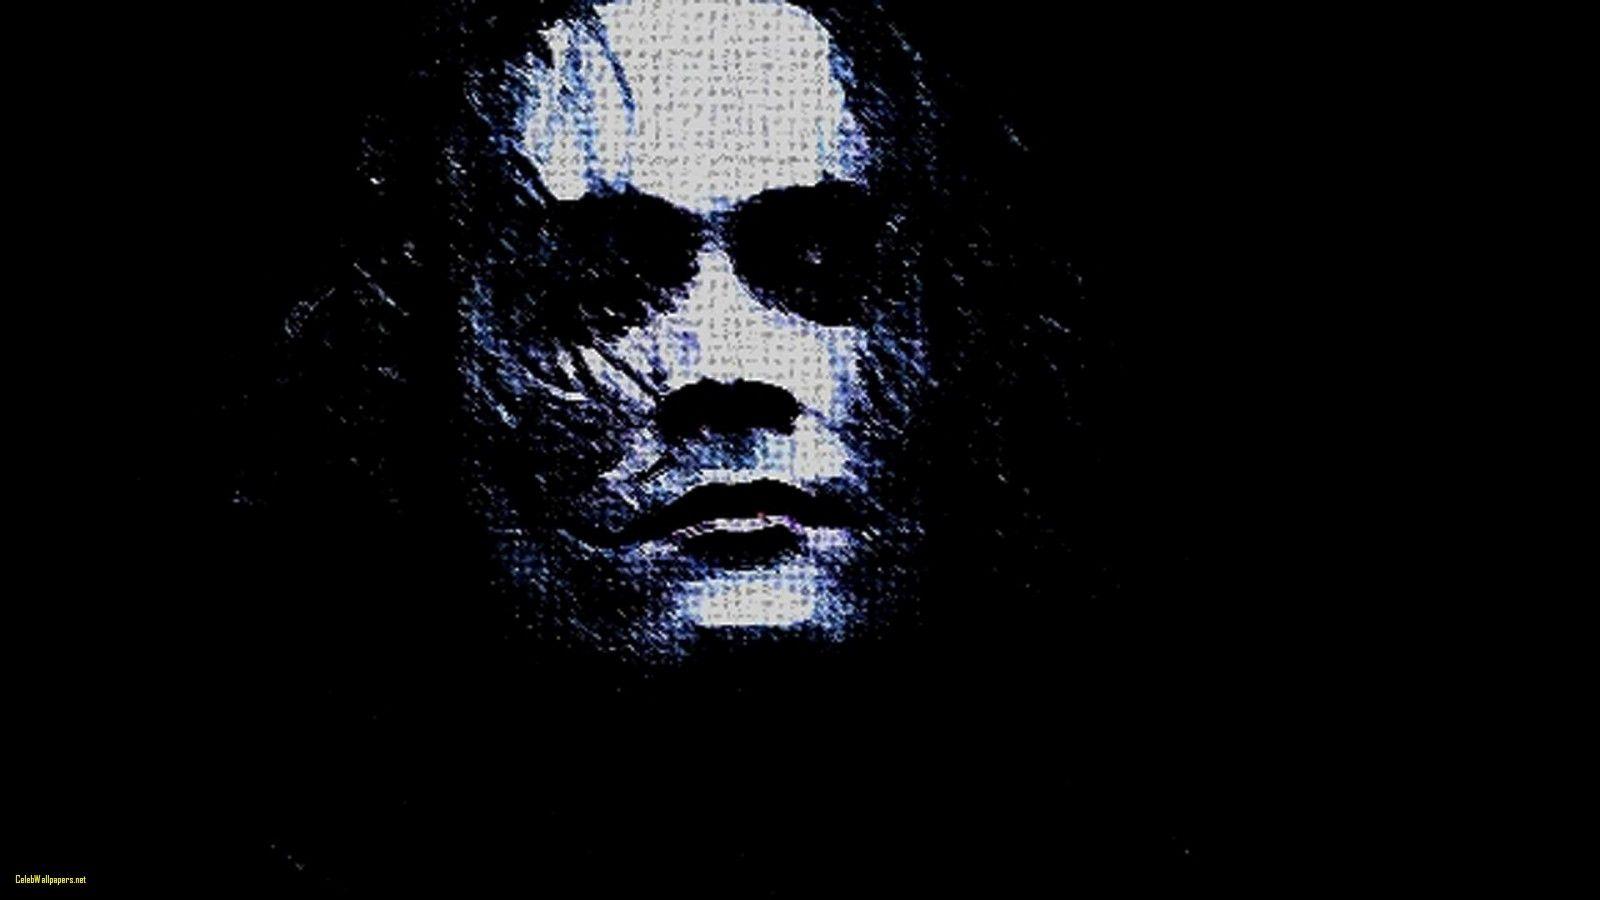 Crow Wallpaper Best Of the Crow Wallpaper HD Creative the Crow Full